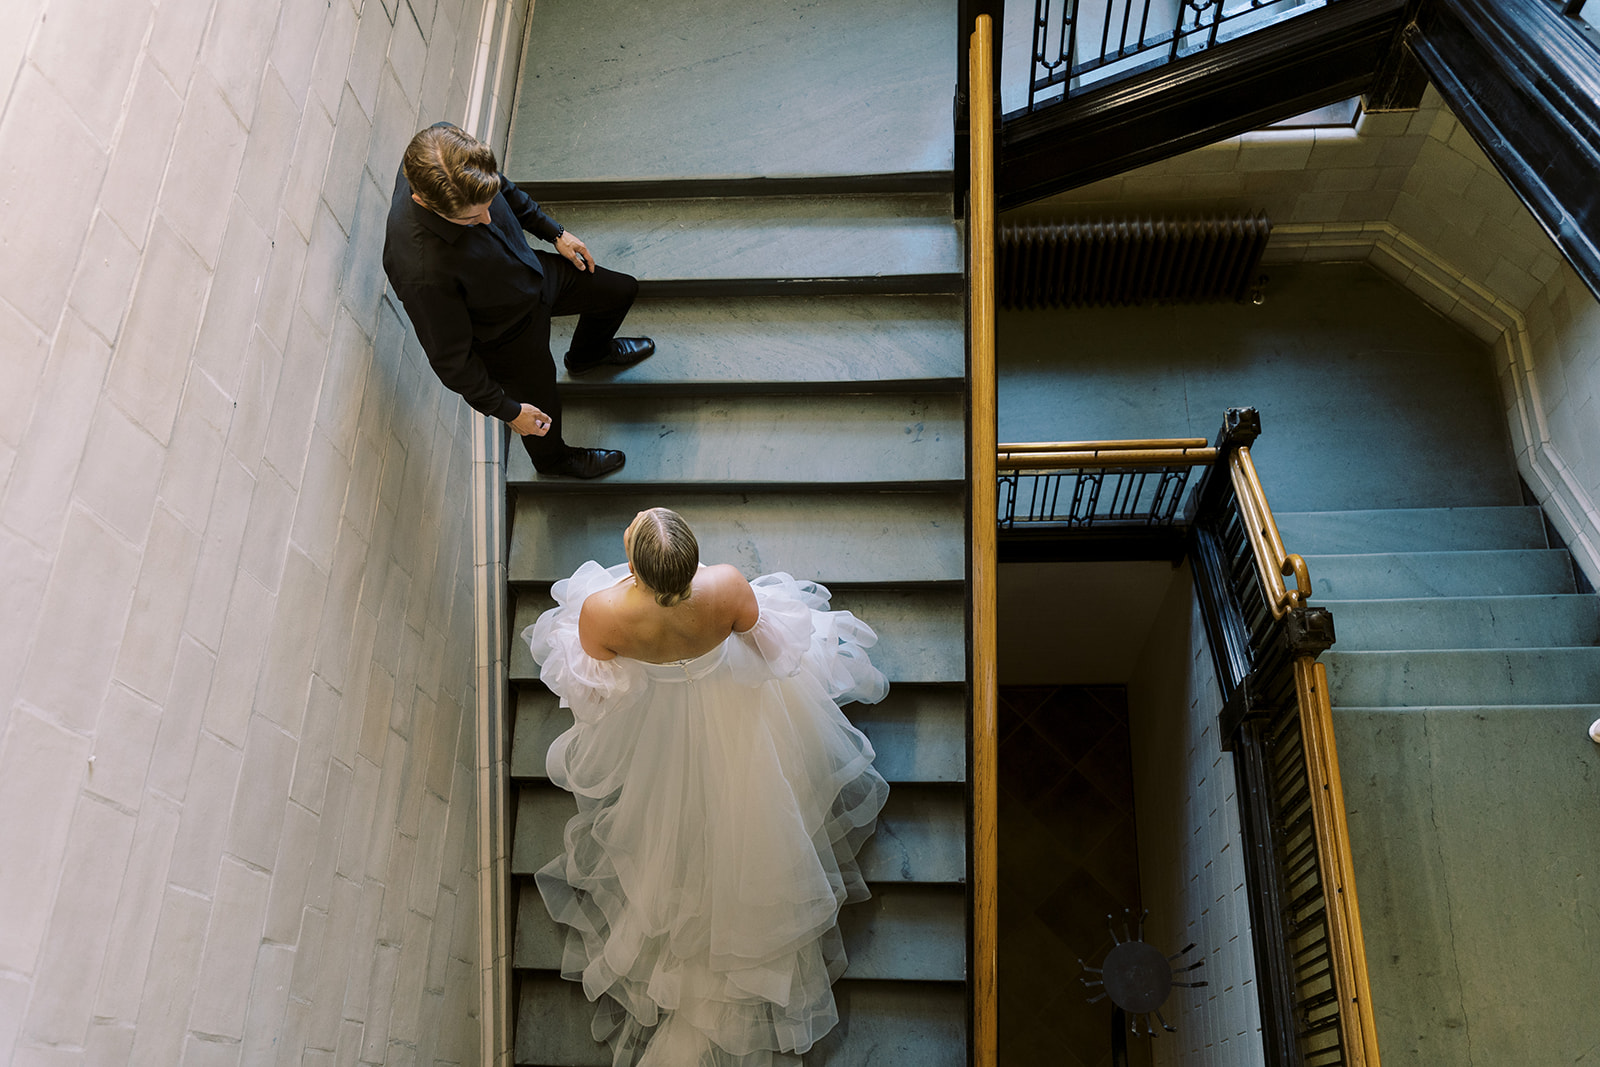 
baroque-inspired, chic bridal style, on-trend bridal portraits, wedding portrait inspiration, historic architecture, chic bridal style, formal attire, 
